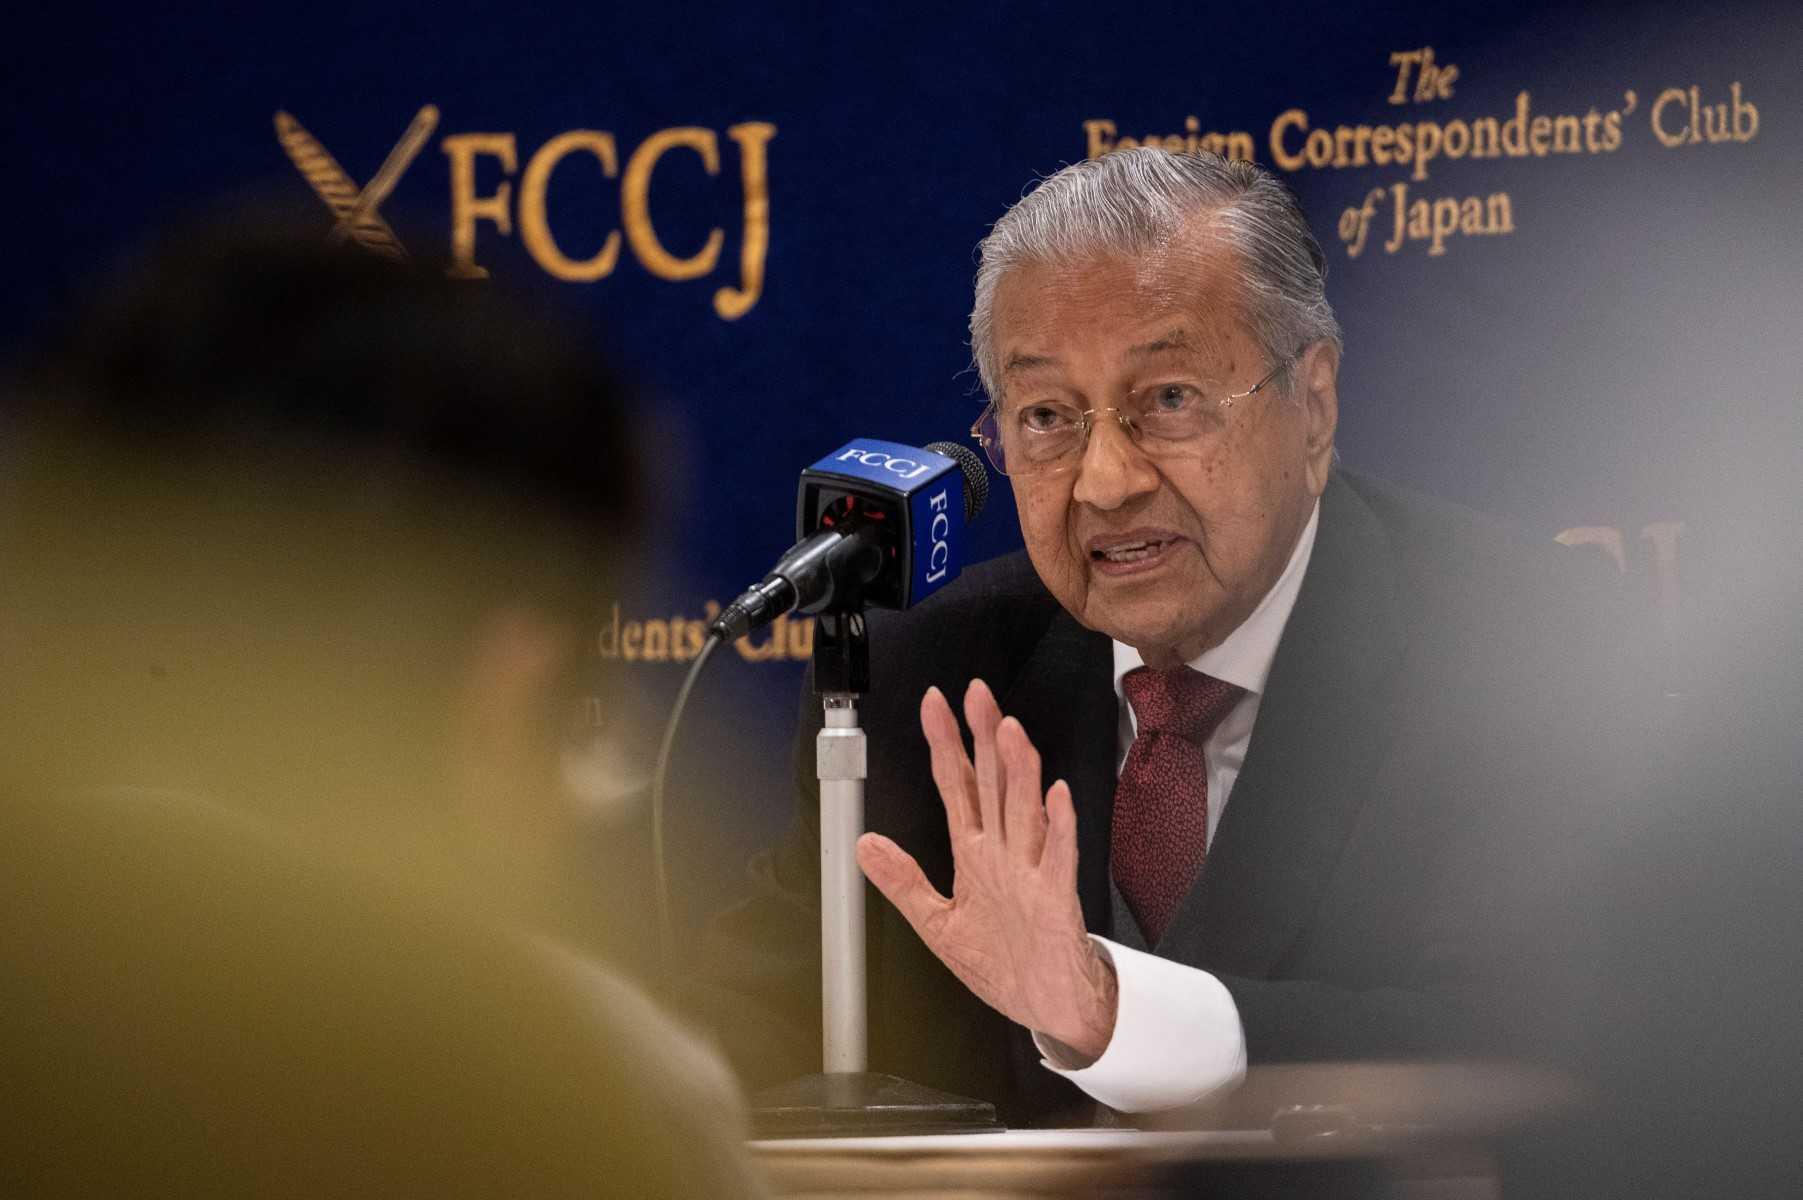 Former prime minister Dr Mahathir Mohamad takes part in a question-and-answer session at the Foreign Correspondents' Club of Japan during his visit to Tokyo on May 24. Photo: AFP